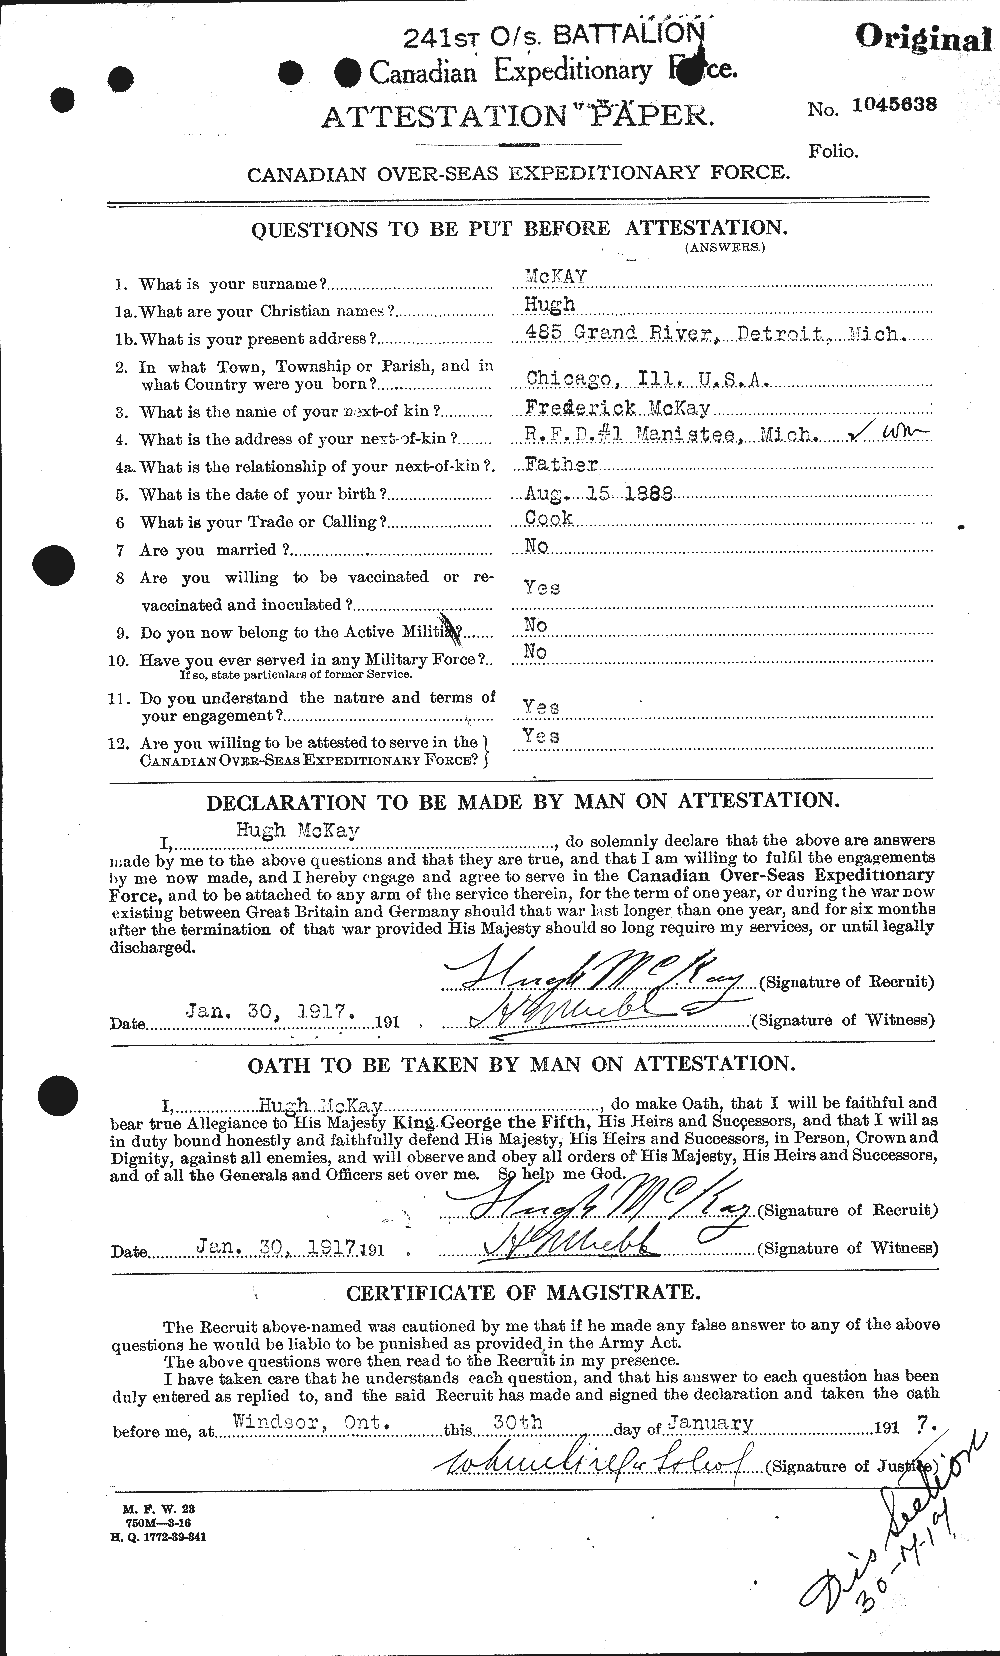 Personnel Records of the First World War - CEF 534762a